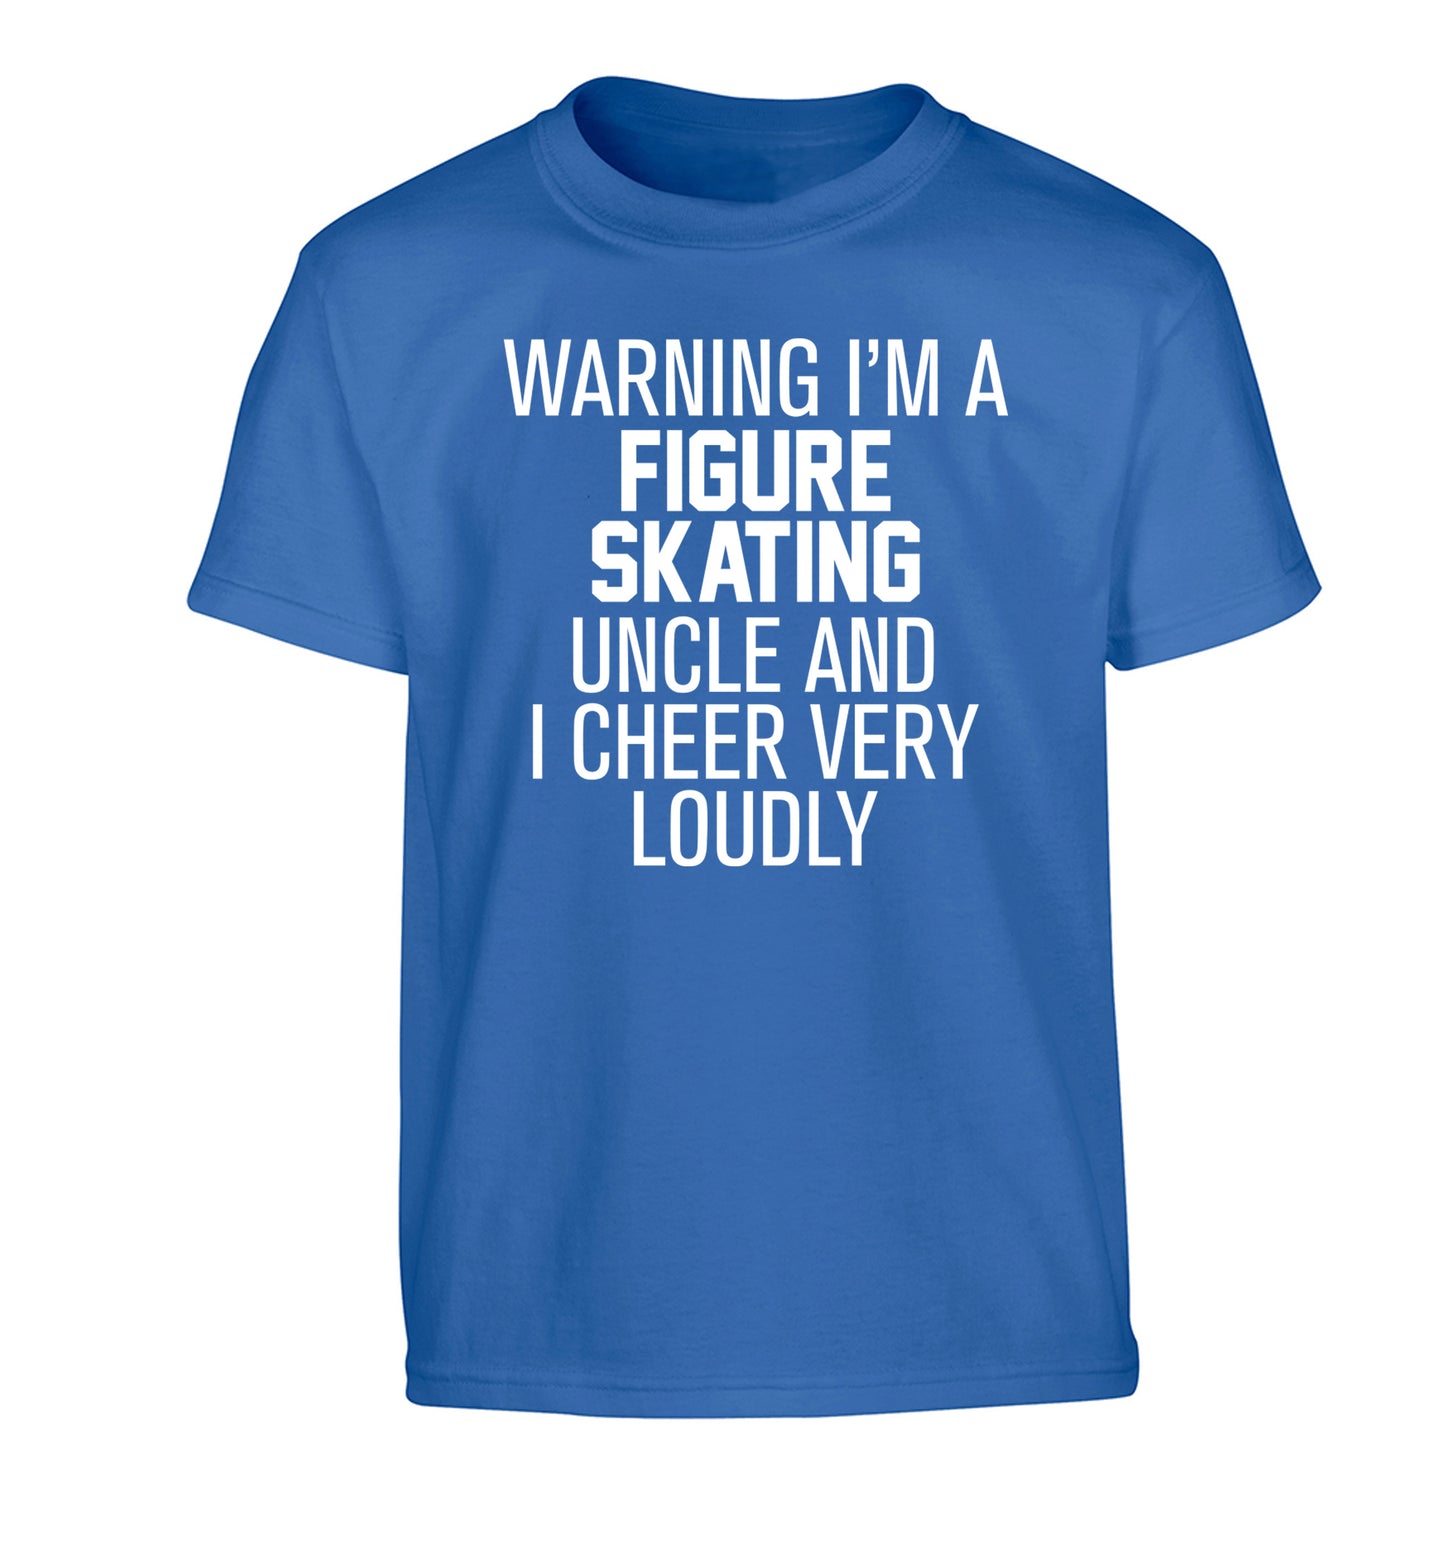 Warning I'm a figure skating uncle and I cheer very loudly Children's blue Tshirt 12-14 Years